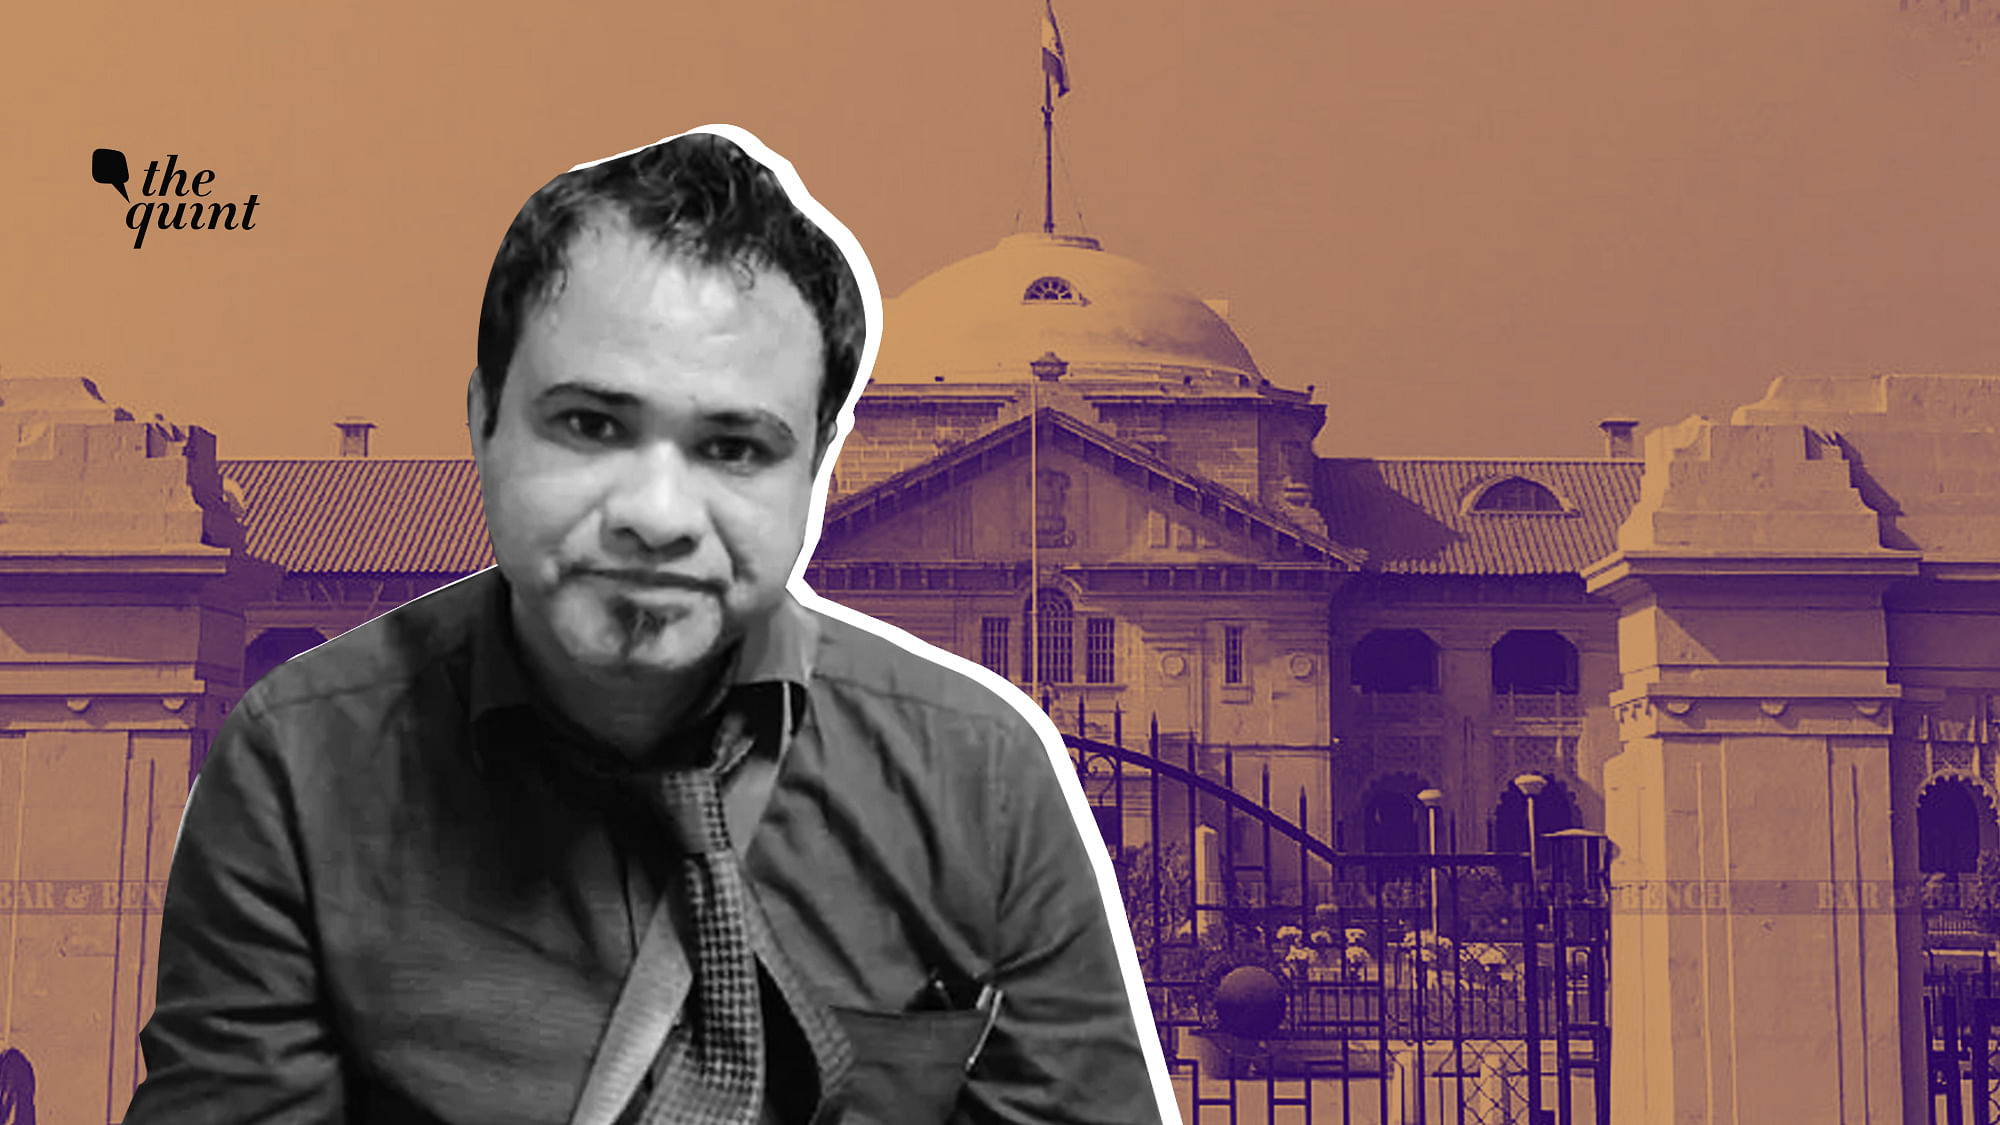 <div class="paragraphs"><p>The Allahabad High Court stayed Uttar Pradesh government's suspension order against paediatrician Dr Kafeel Khan for allegedly mistreating patients at the Bahraich District Hospital for the second time on 9 September.</p></div><div class="paragraphs"><p><br></p></div>